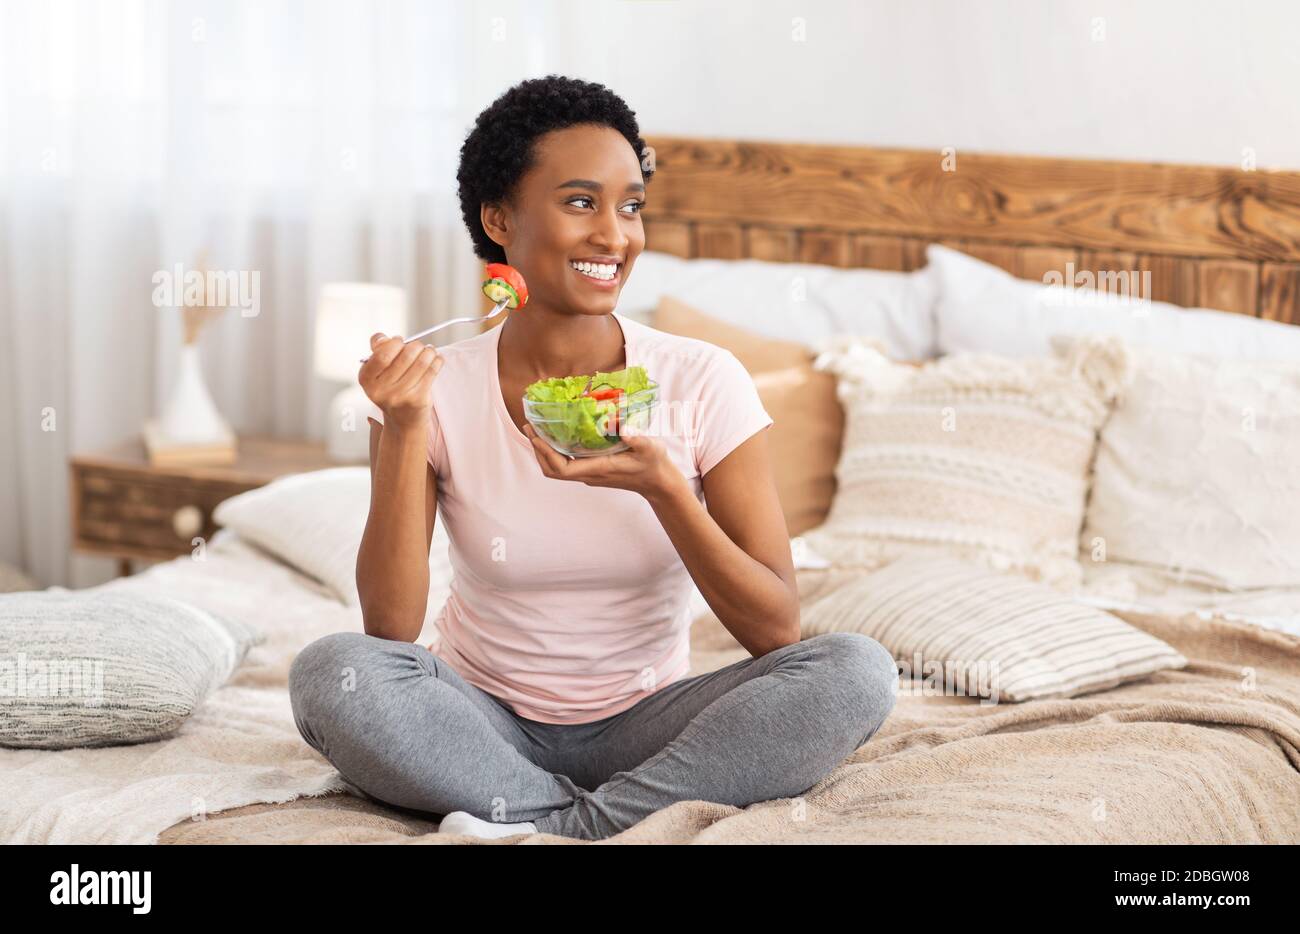 Healthy diet for weight loss concept. Happy black woman eating yummy vegetable salad on bed at home, blank space Stock Photo